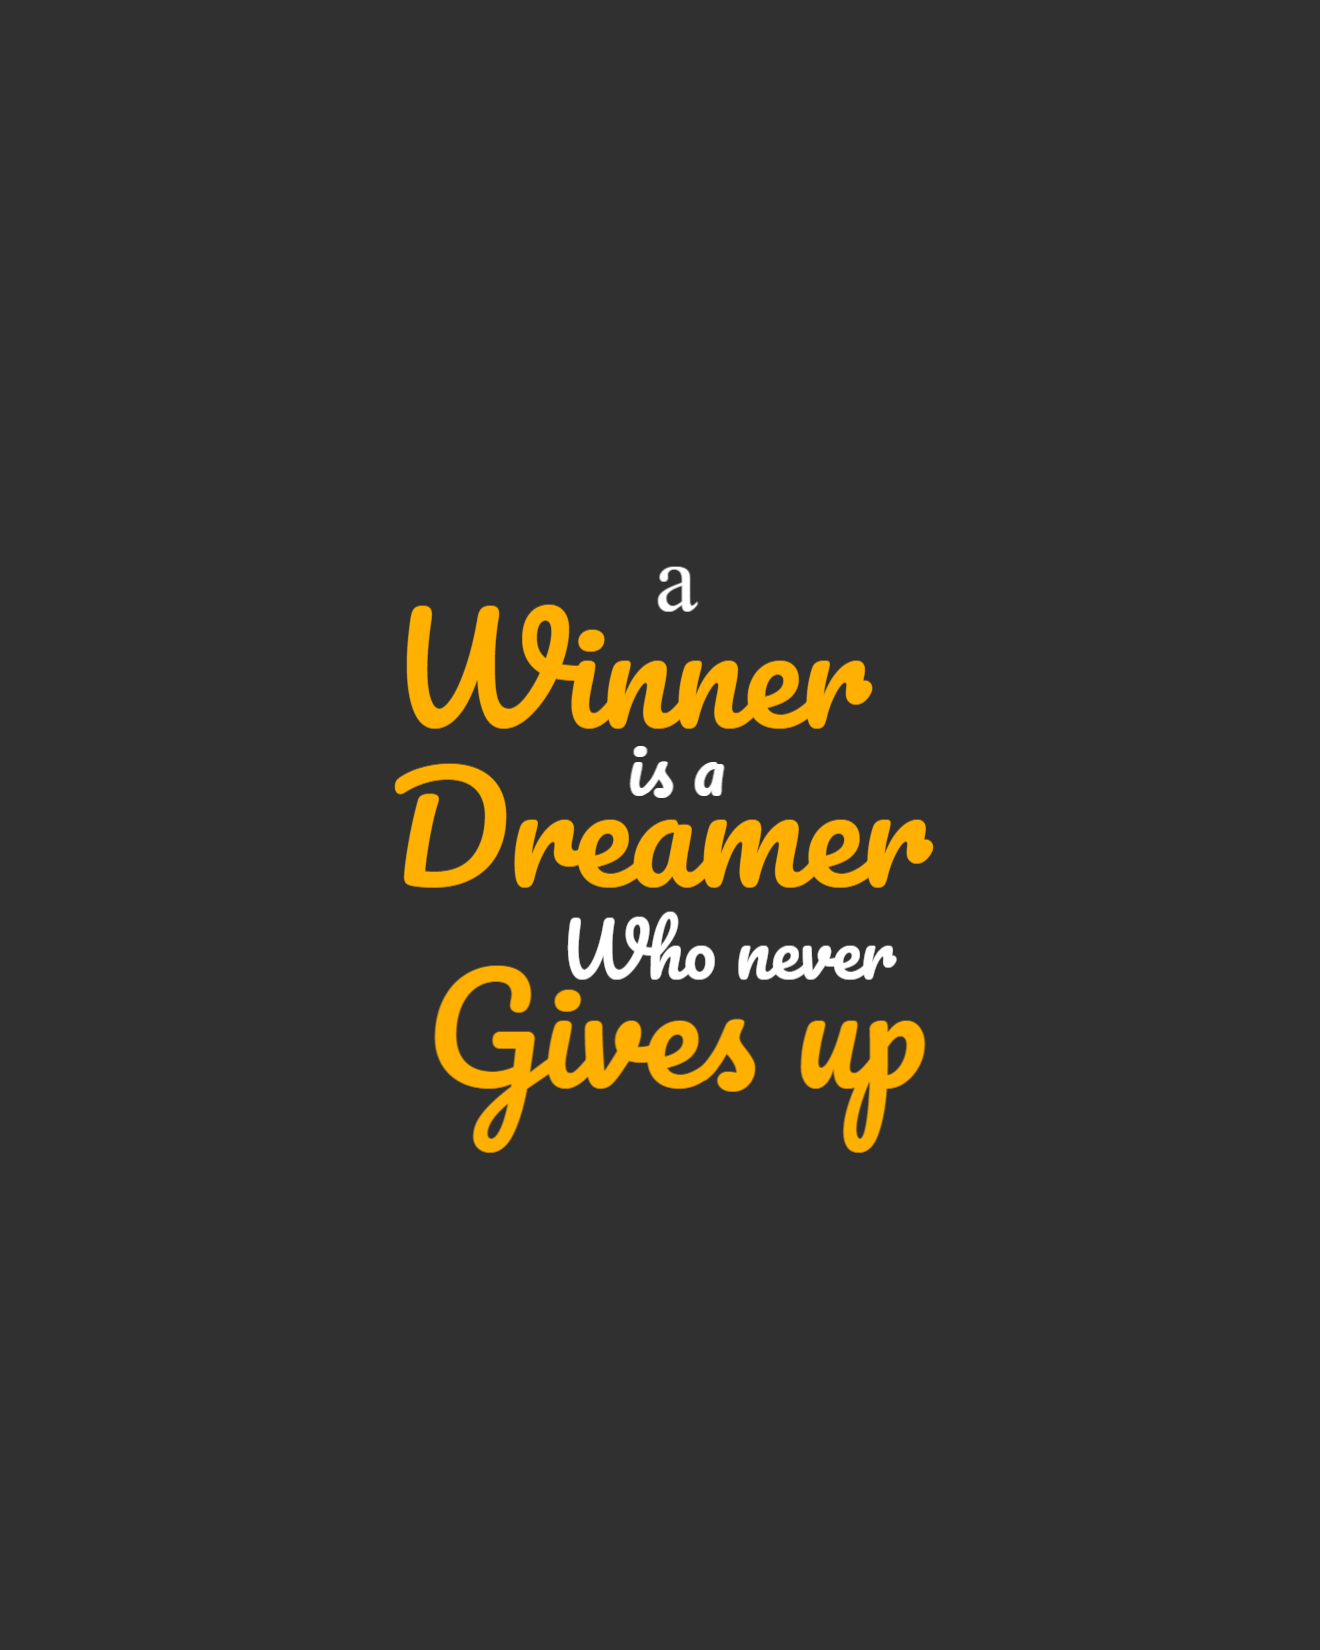 a winner is a dreamer who never gives up